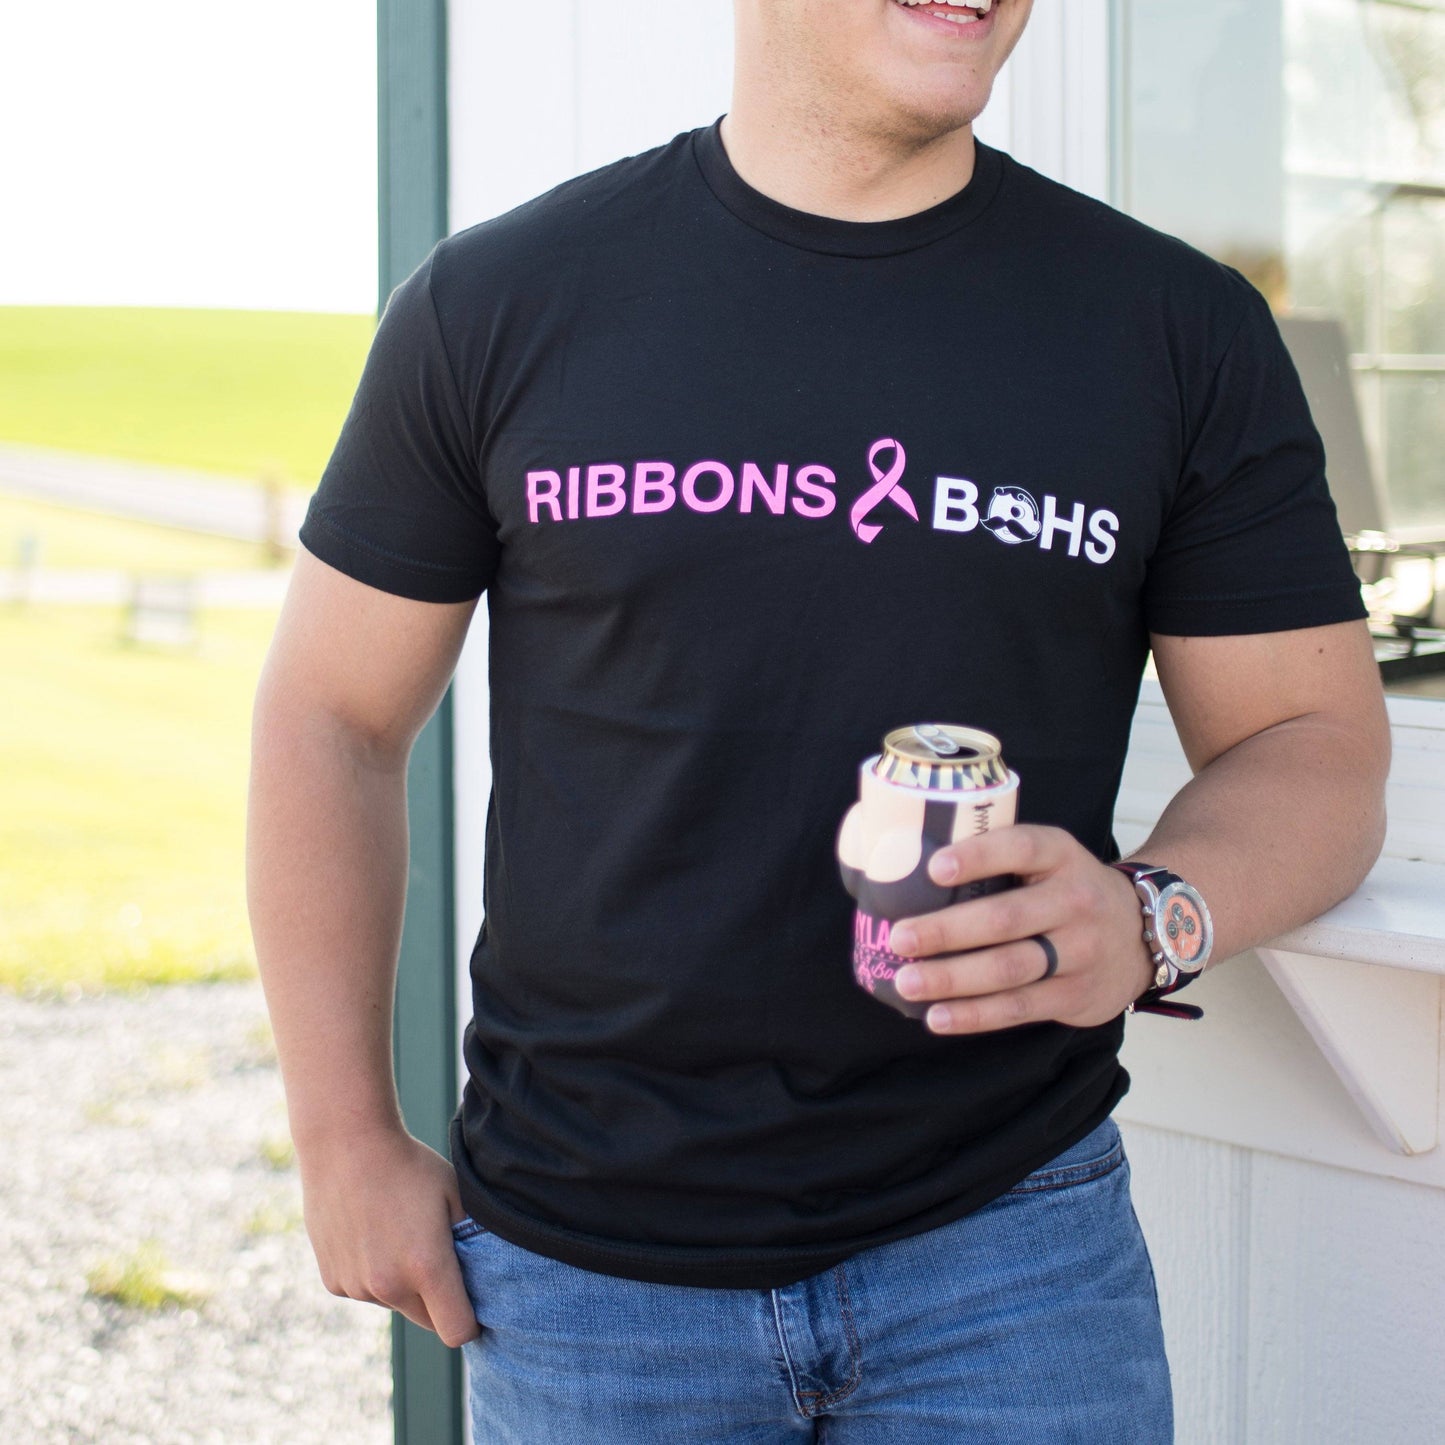 Ribbons & Bohs / Shirt - Route One Apparel